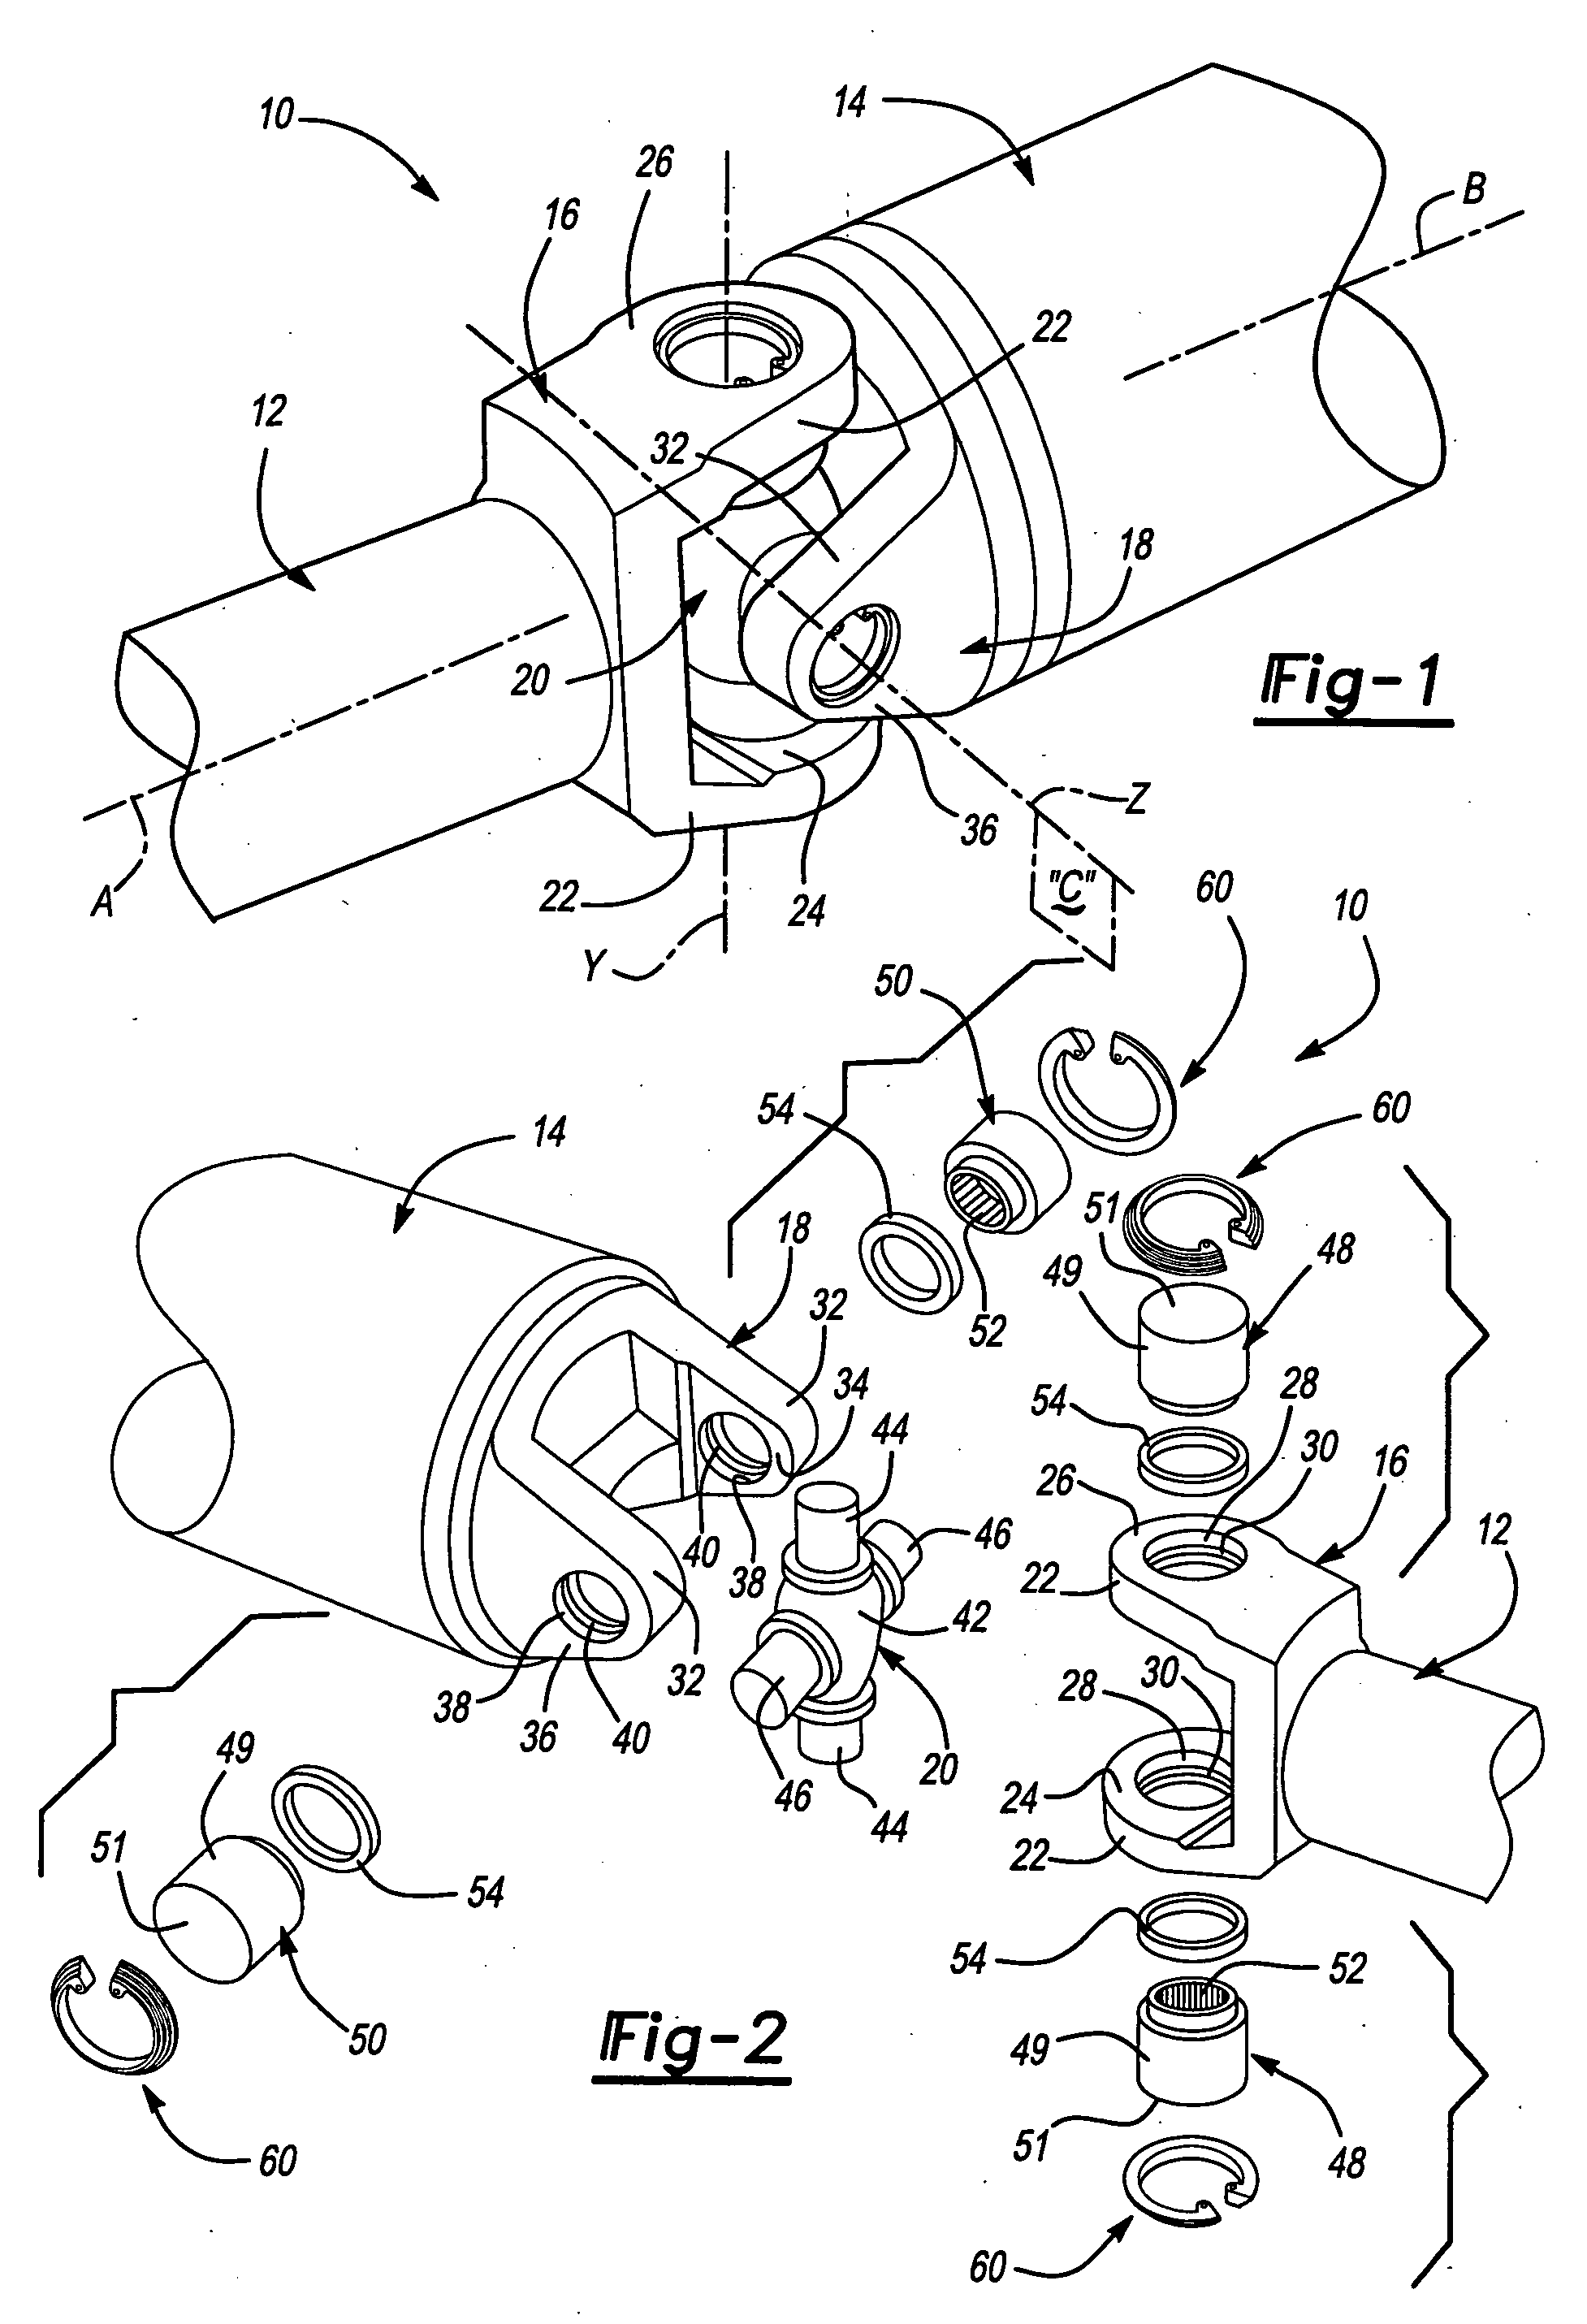 Driveshaft assembly with retention mechanism